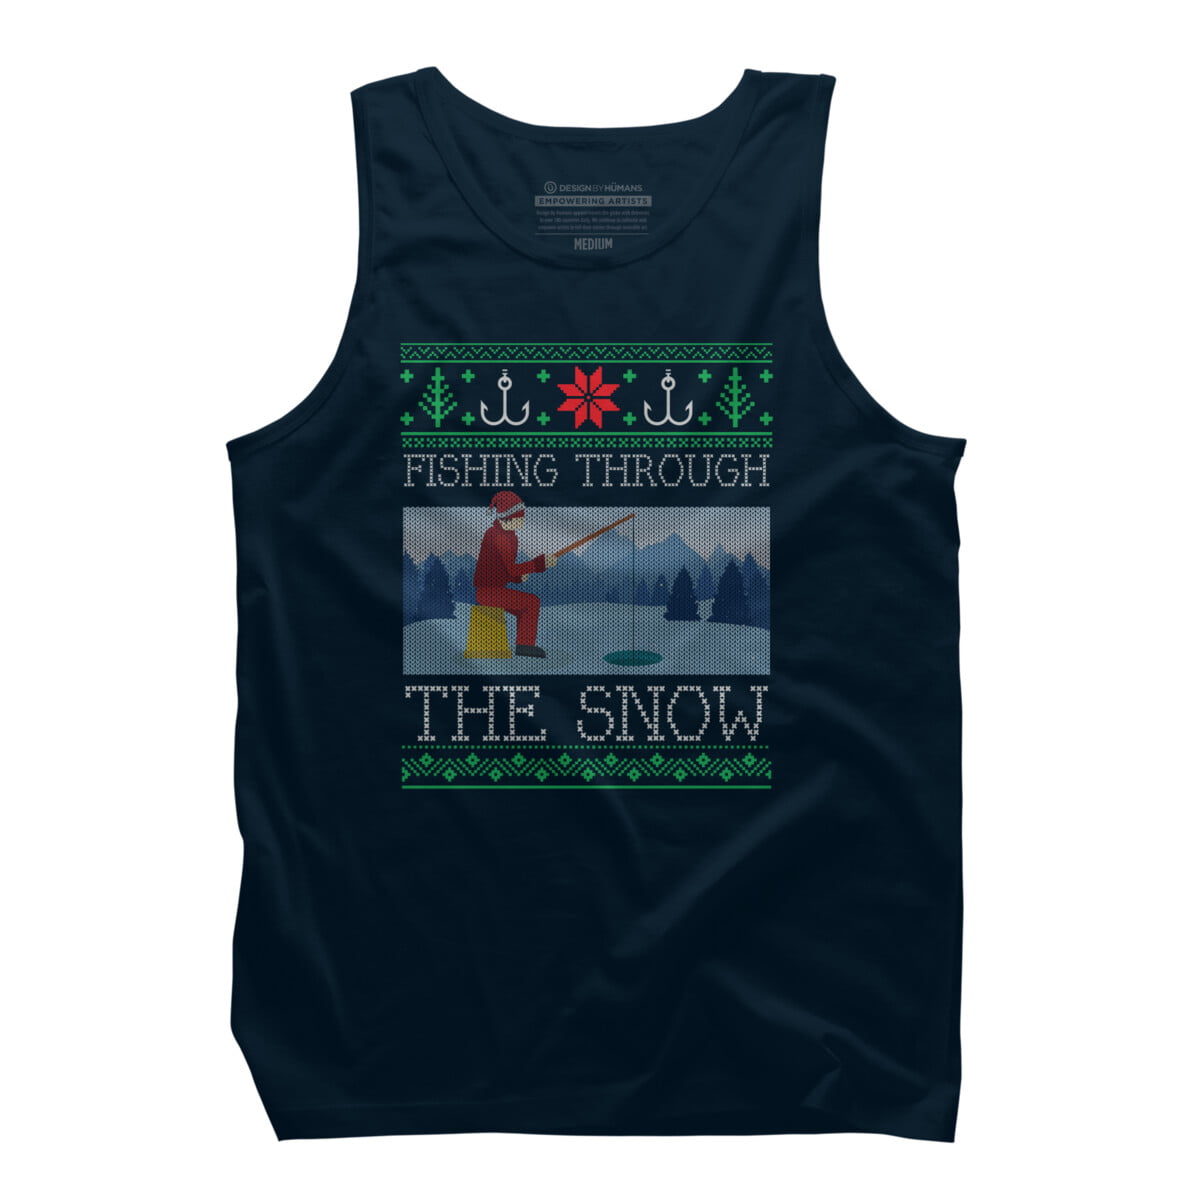 Christmas Ice Fishing Through Snow Fishing Ugly Christmas Sweate Mens  Charcoal Gray Graphic Tank Top - Design By Humans M